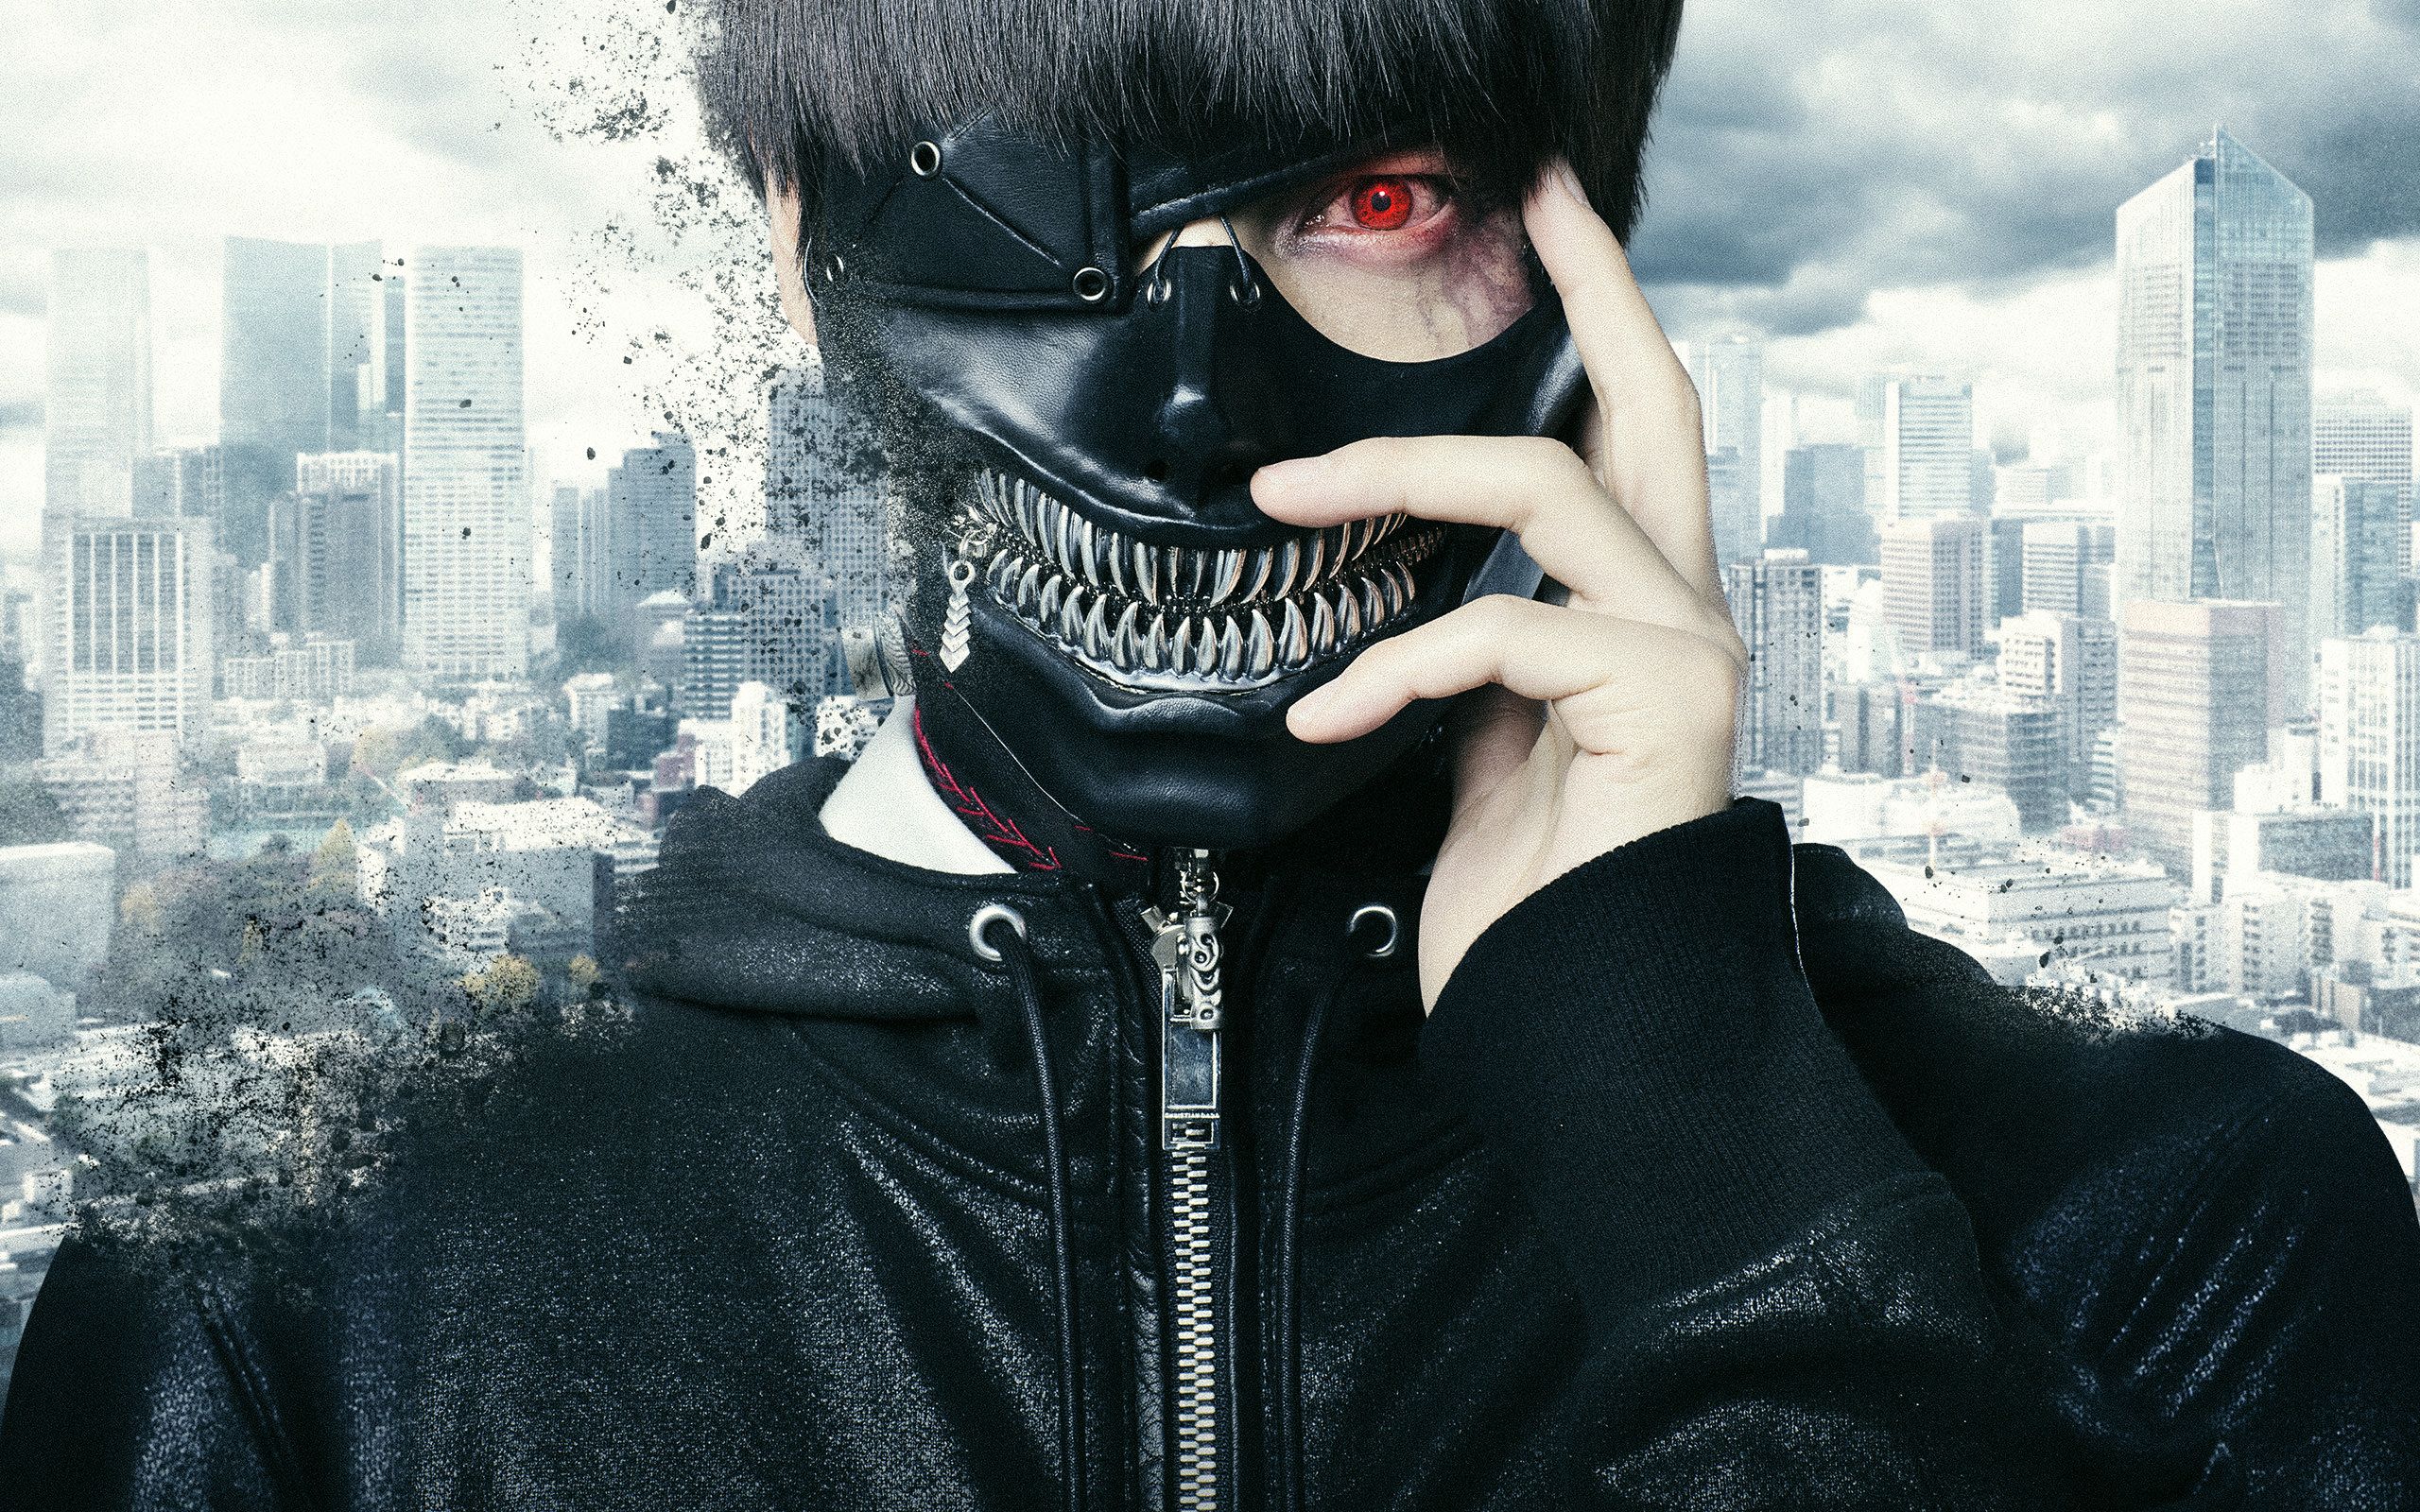 TMC To Premiere Tokyo Ghoul Live Action Movie This February